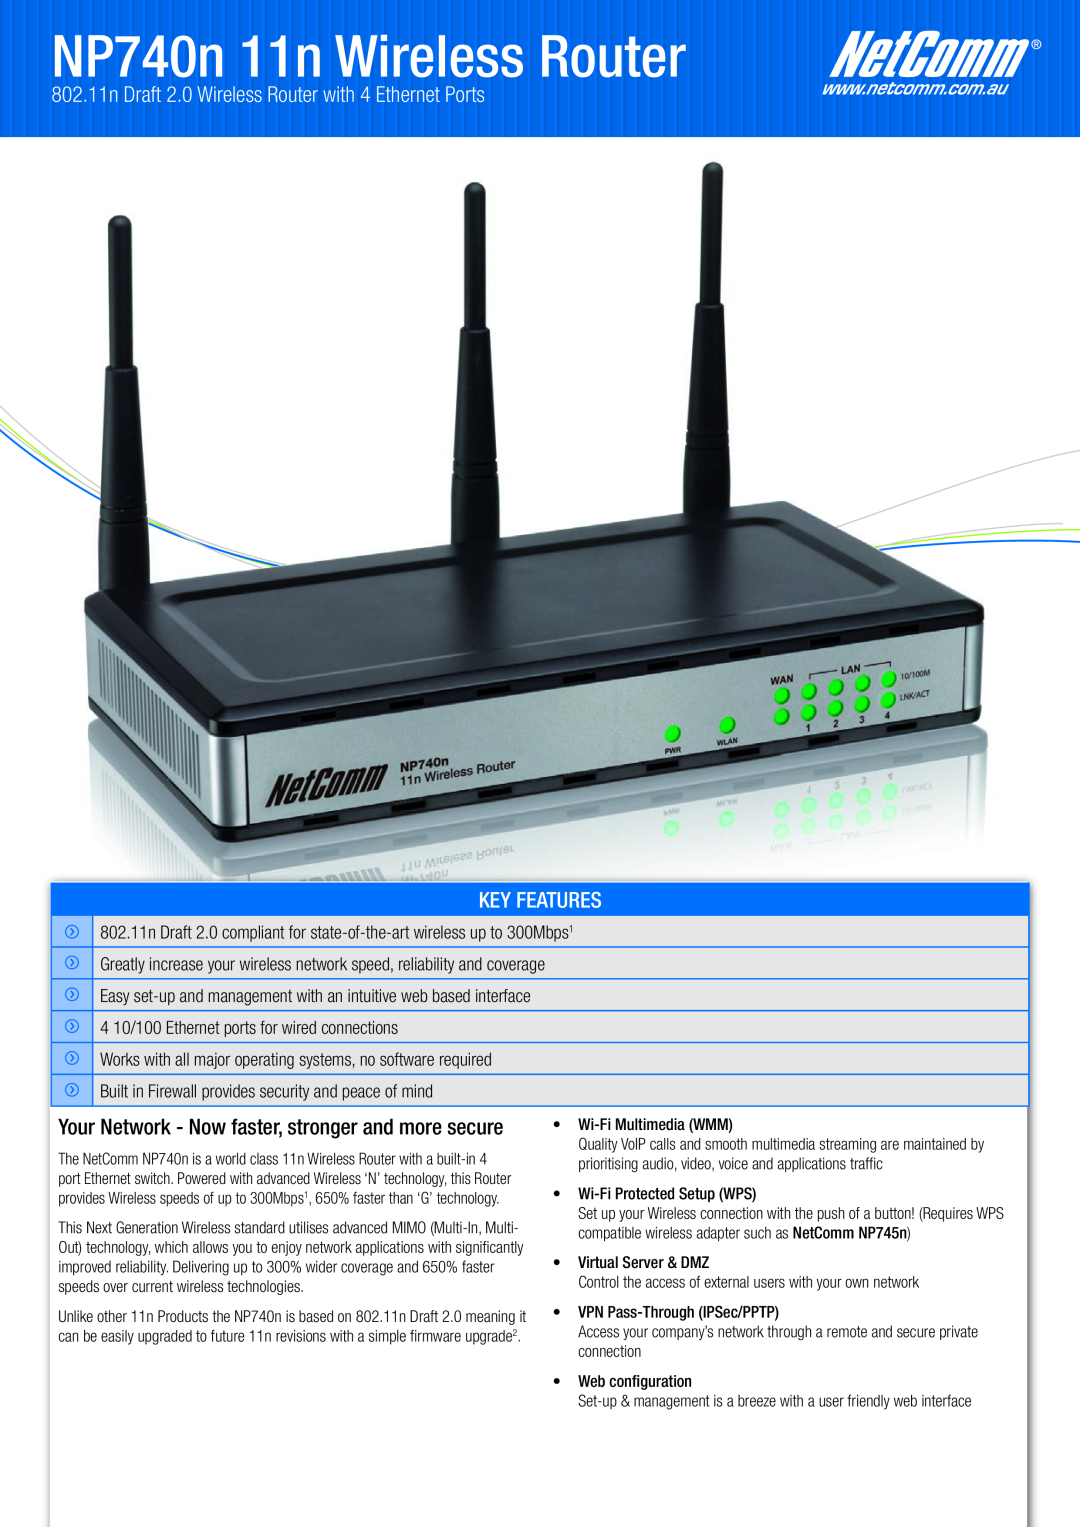 NetComm manual NP740n 11n Wireless Router, 802.11n Draft 2.0 Wireless Router with 4 Ethernet Ports KEY FEATURES 